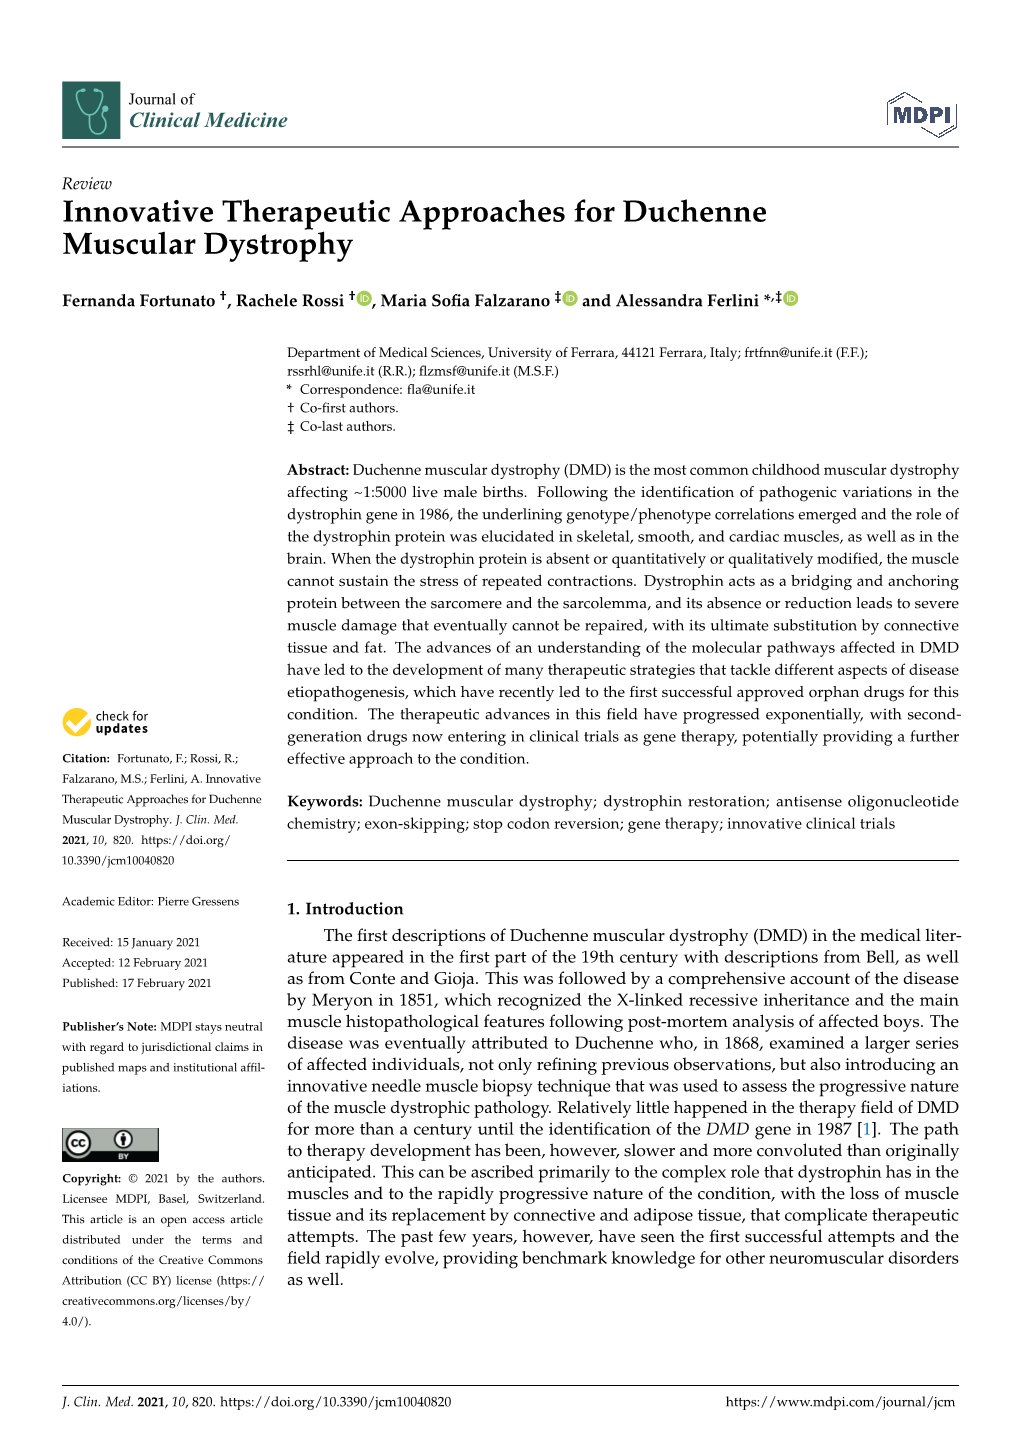 Innovative Therapeutic Approaches for Duchenne Muscular Dystrophy